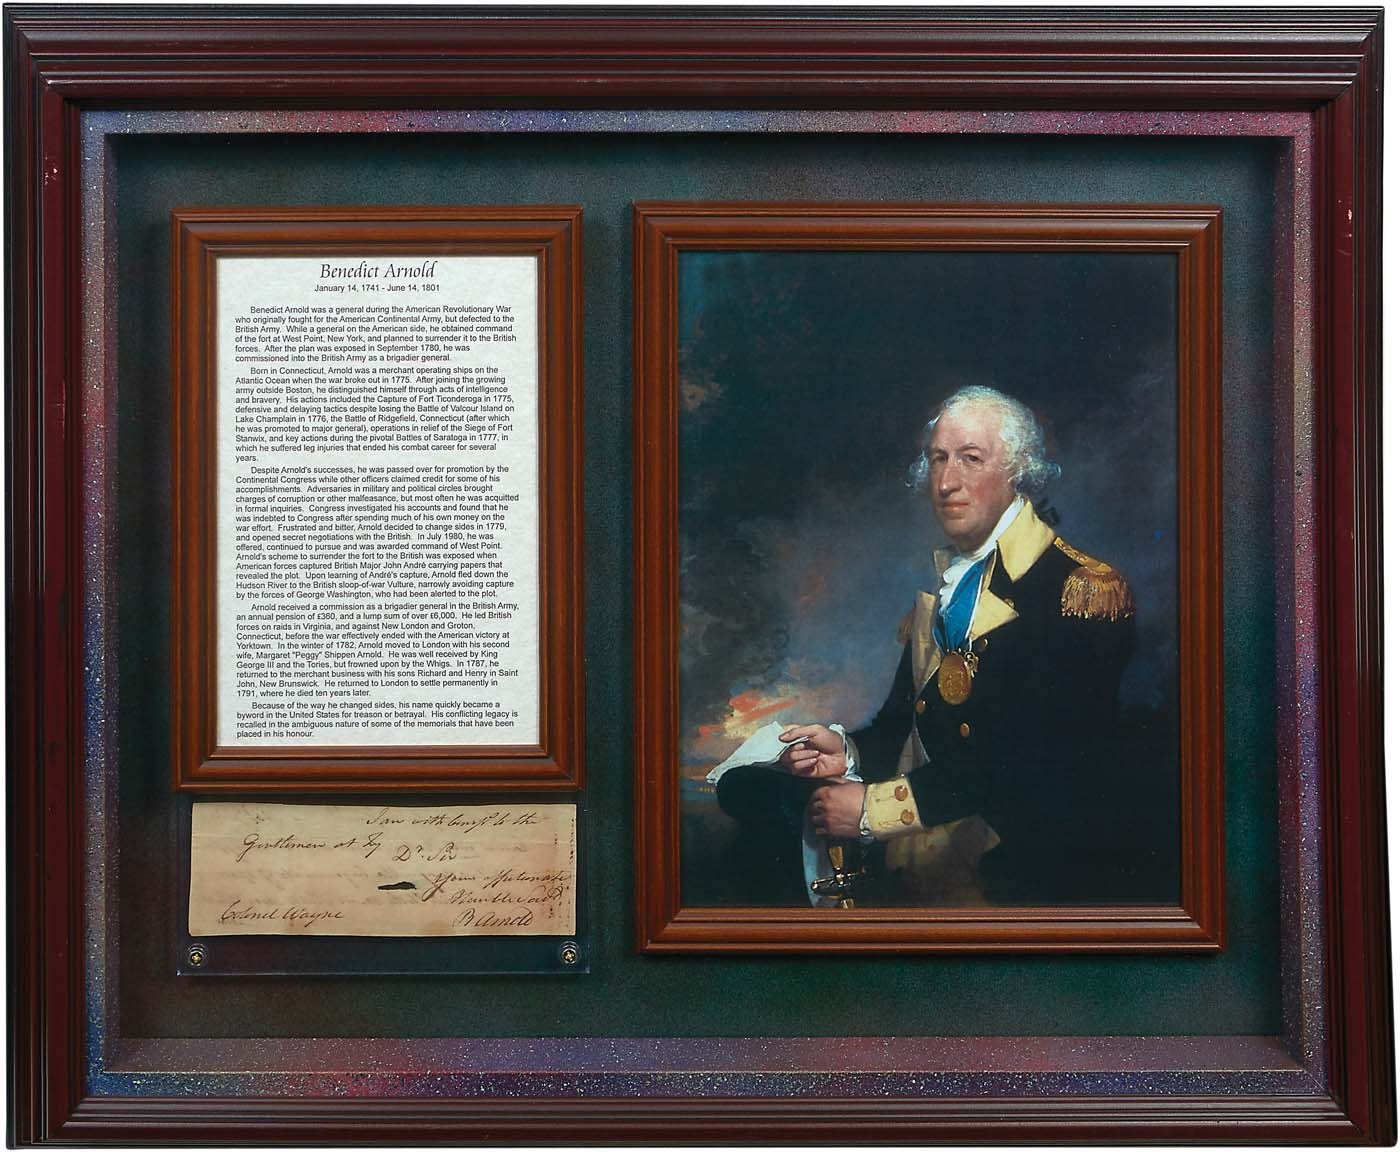 Benedict Arnold Signed Letter Display with "Boston" Content (JSA)